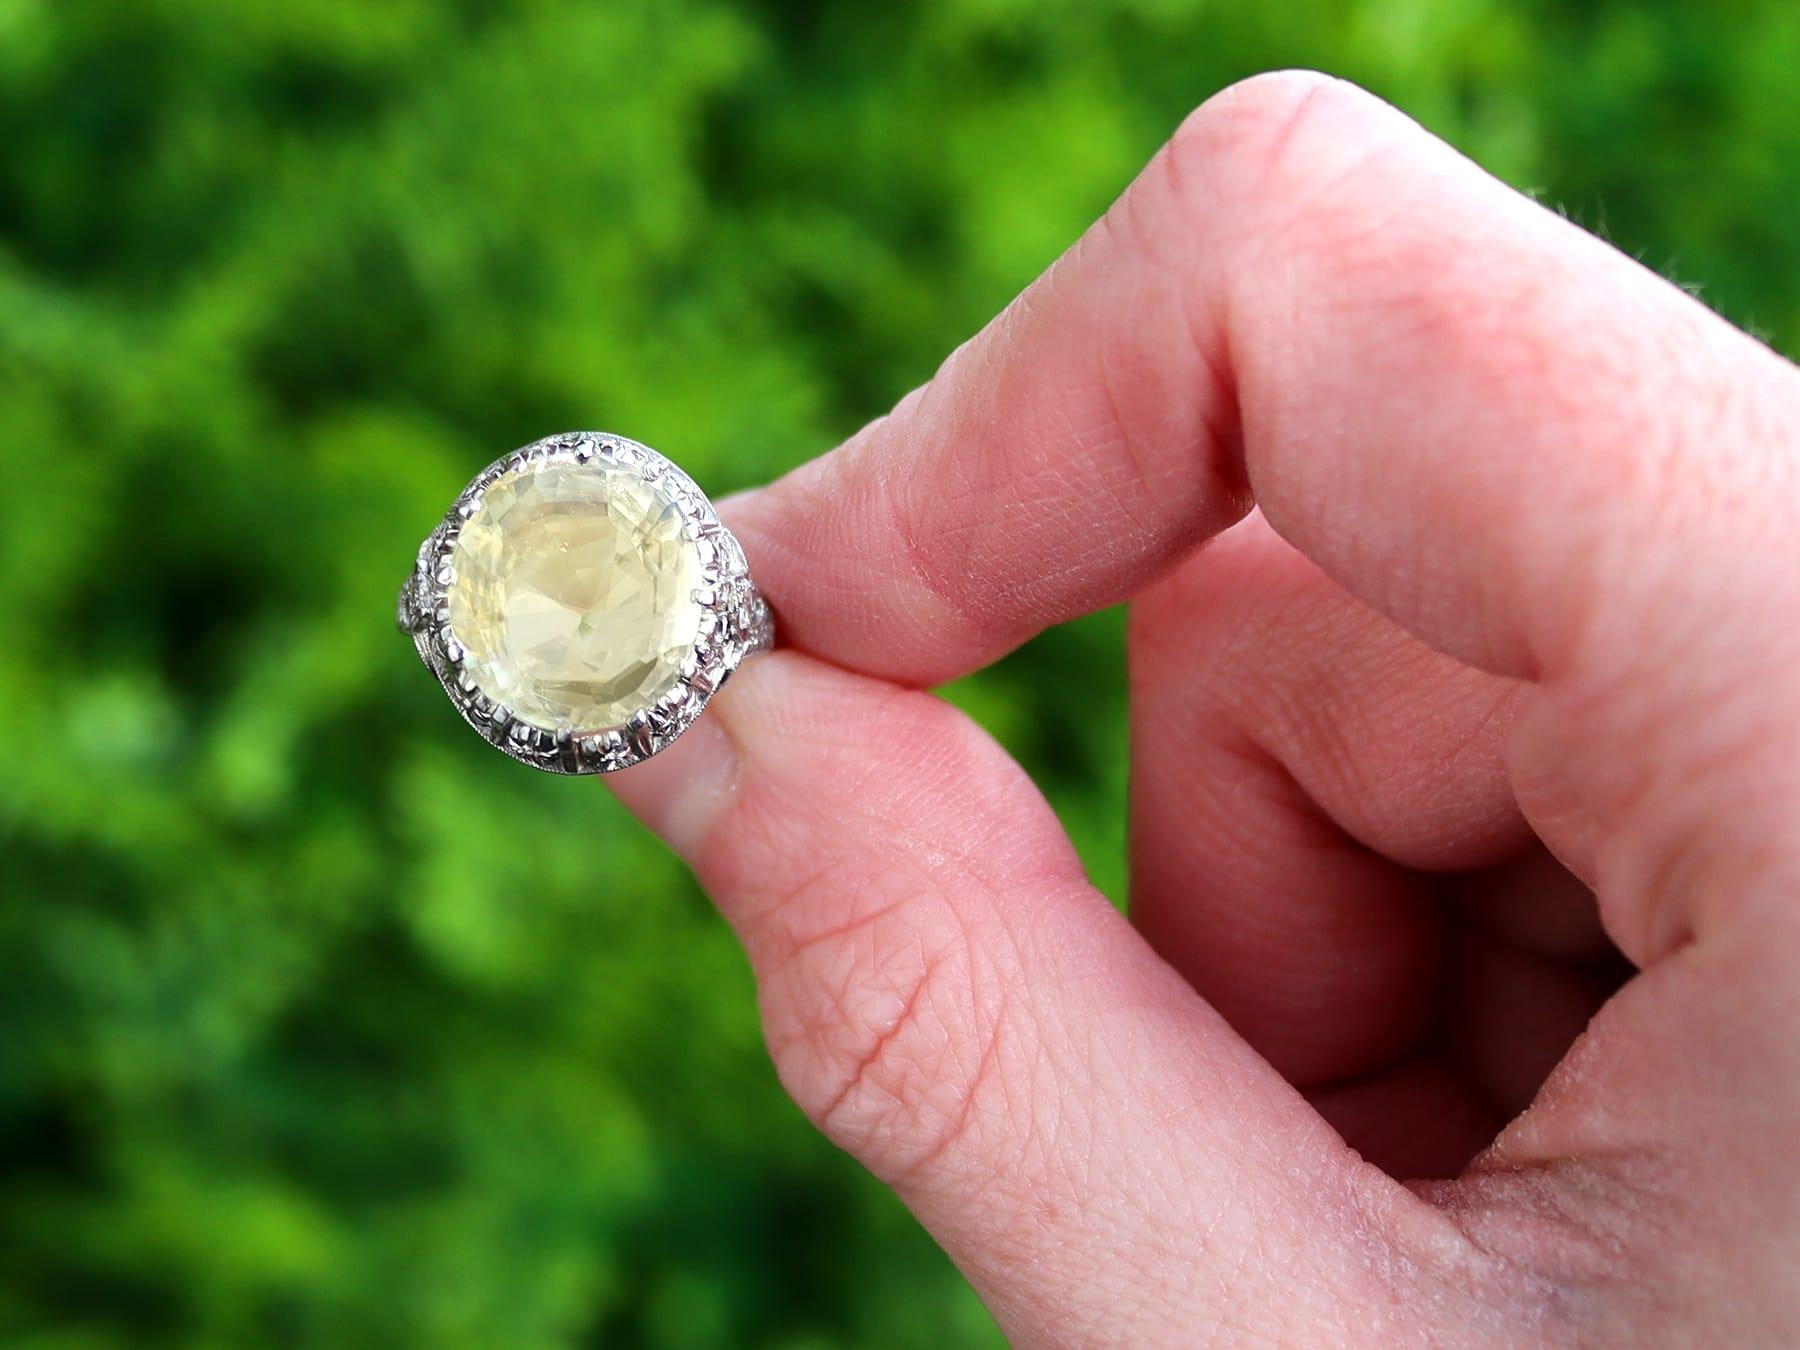 A stunning, fine and impressive, rare antique 6.81 carat yellow sapphire and 0.08 carat diamond, platinum dress ring; part of our diverse antique jewelry and estate jewelry collections.

This stunning, fine and impressive antique yellow sapphire and